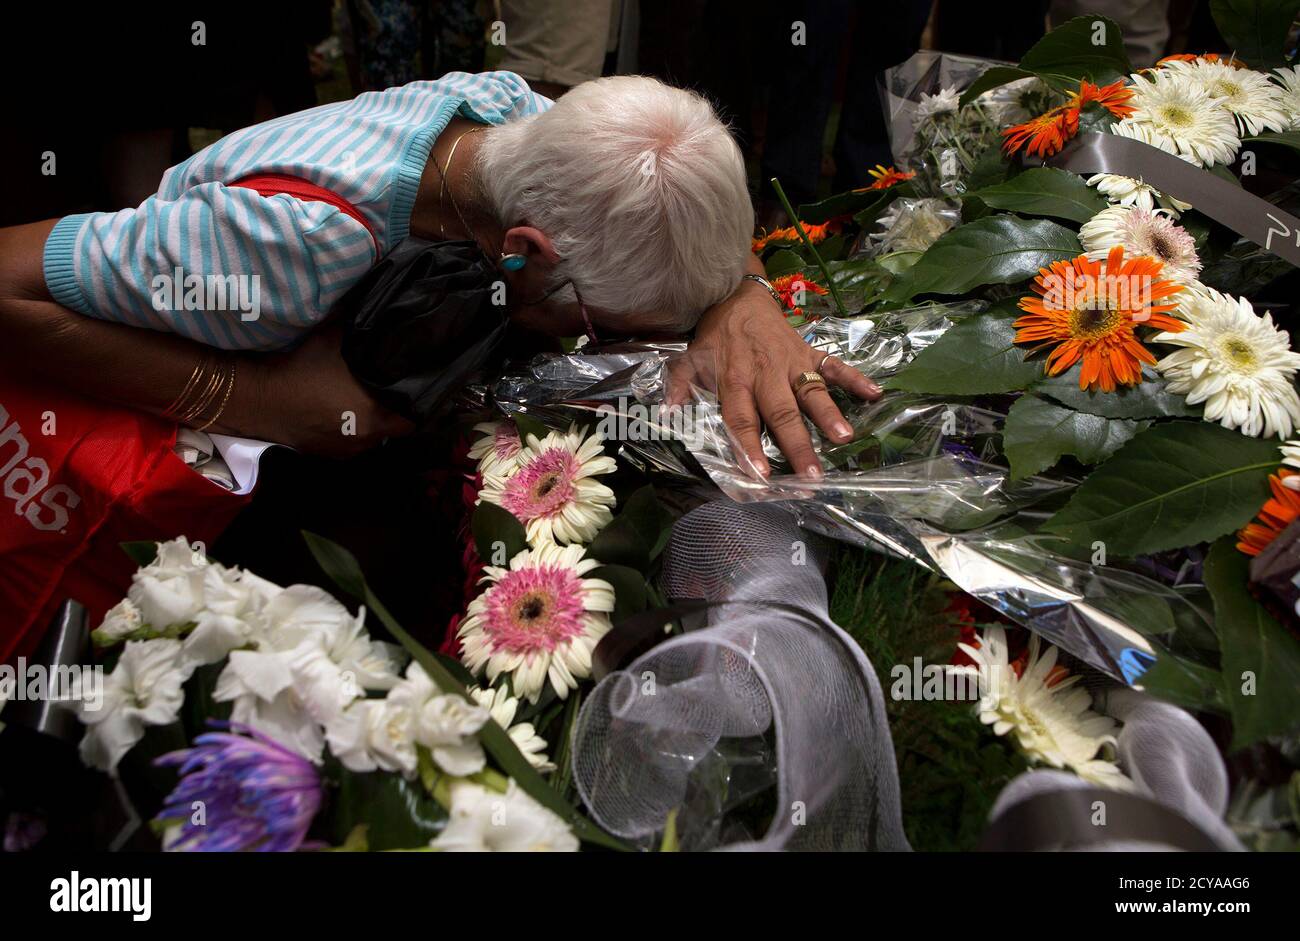 A mourner leans on flowers placed on the grave of fallen Israeli soldier Max Steinberg during his funeral at Mount Herzl military cemetery in Jerusalem July 23, 2014. Steinberg, a 23 year-old American from California's San Fernando Valley, was among 13 Israeli Defense Forces soldiers killed on Sunday during fighting in Gaza. REUTERS/Siegfried Modola (JERUSALEM - Tags: CONFLICT POLITICS CIVIL UNREST MILITARY) Stock Photo